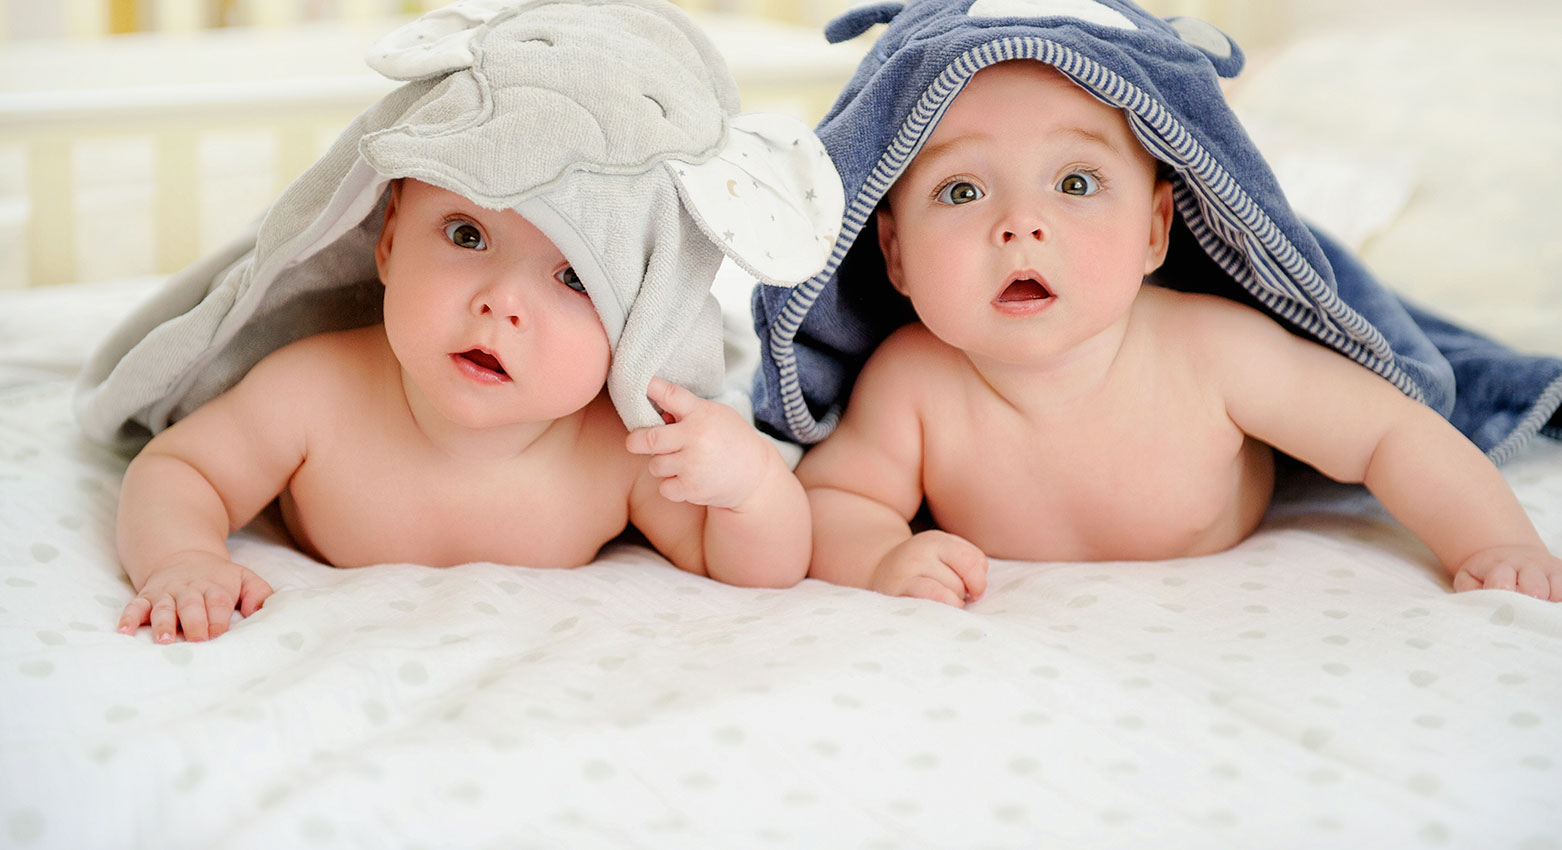 lovely Twins Babies image